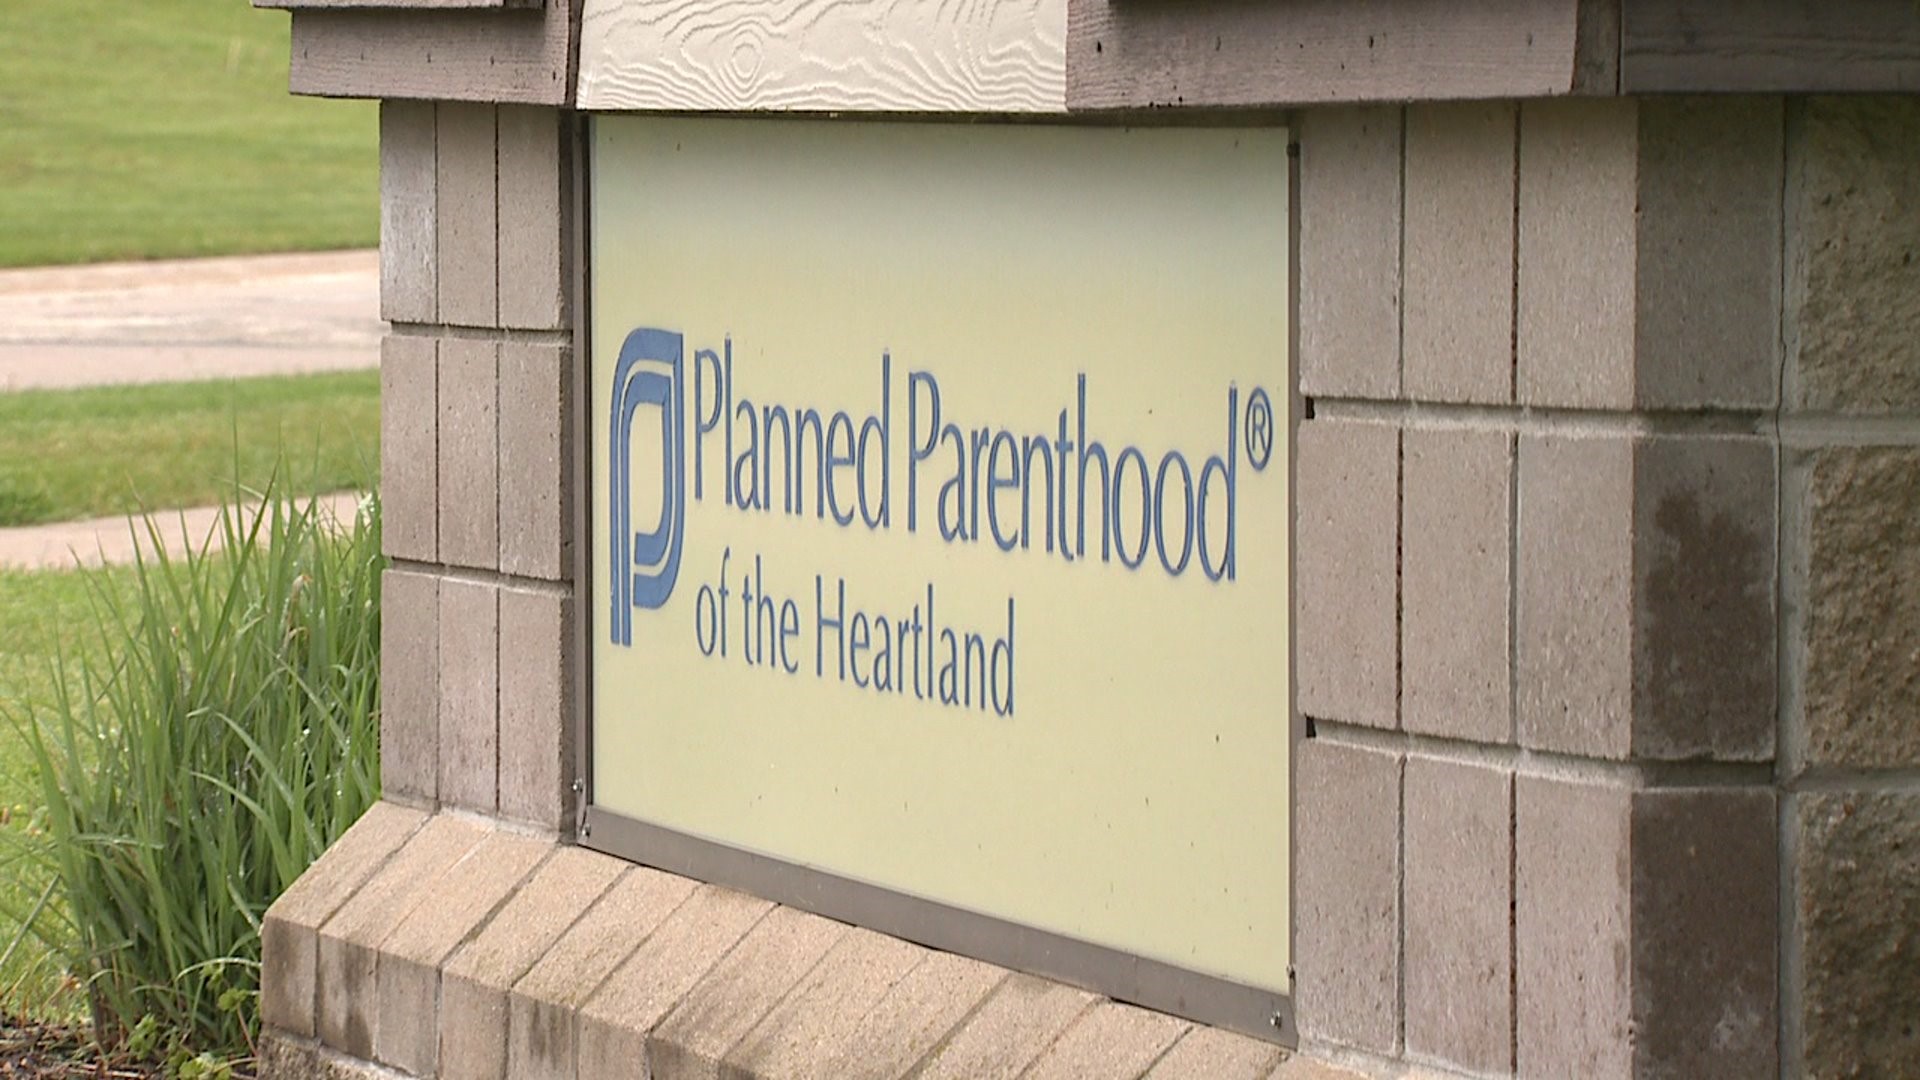 Looking to fill the gap as Planned Parenthood announces closure